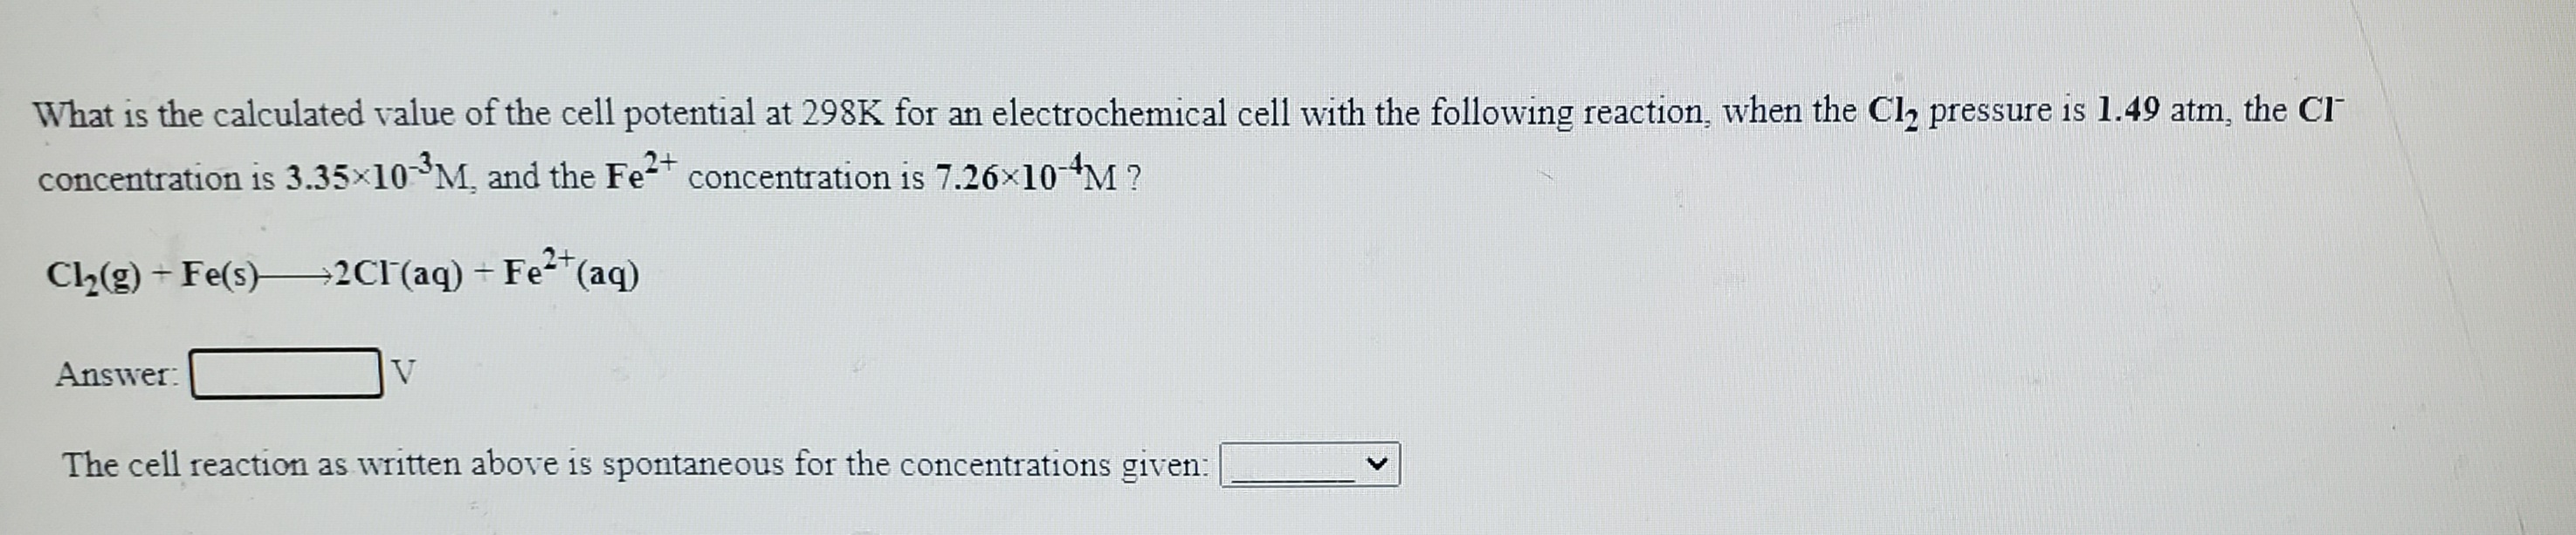 What is the calculated value of the cell potential at 298K for an electrochemical cell with the following reaction, when the Cl,2 pressure is 1.49 atm, the CI
concentration is 3.35x10 M, and the Fe-t concentration is 7.26×10M ?
C2(g) - Fe(s) 2Cl(aq) + Fe²*(aq)
Answer:
V
The cell reaction as written above is spontaneous for the concentrations given:
